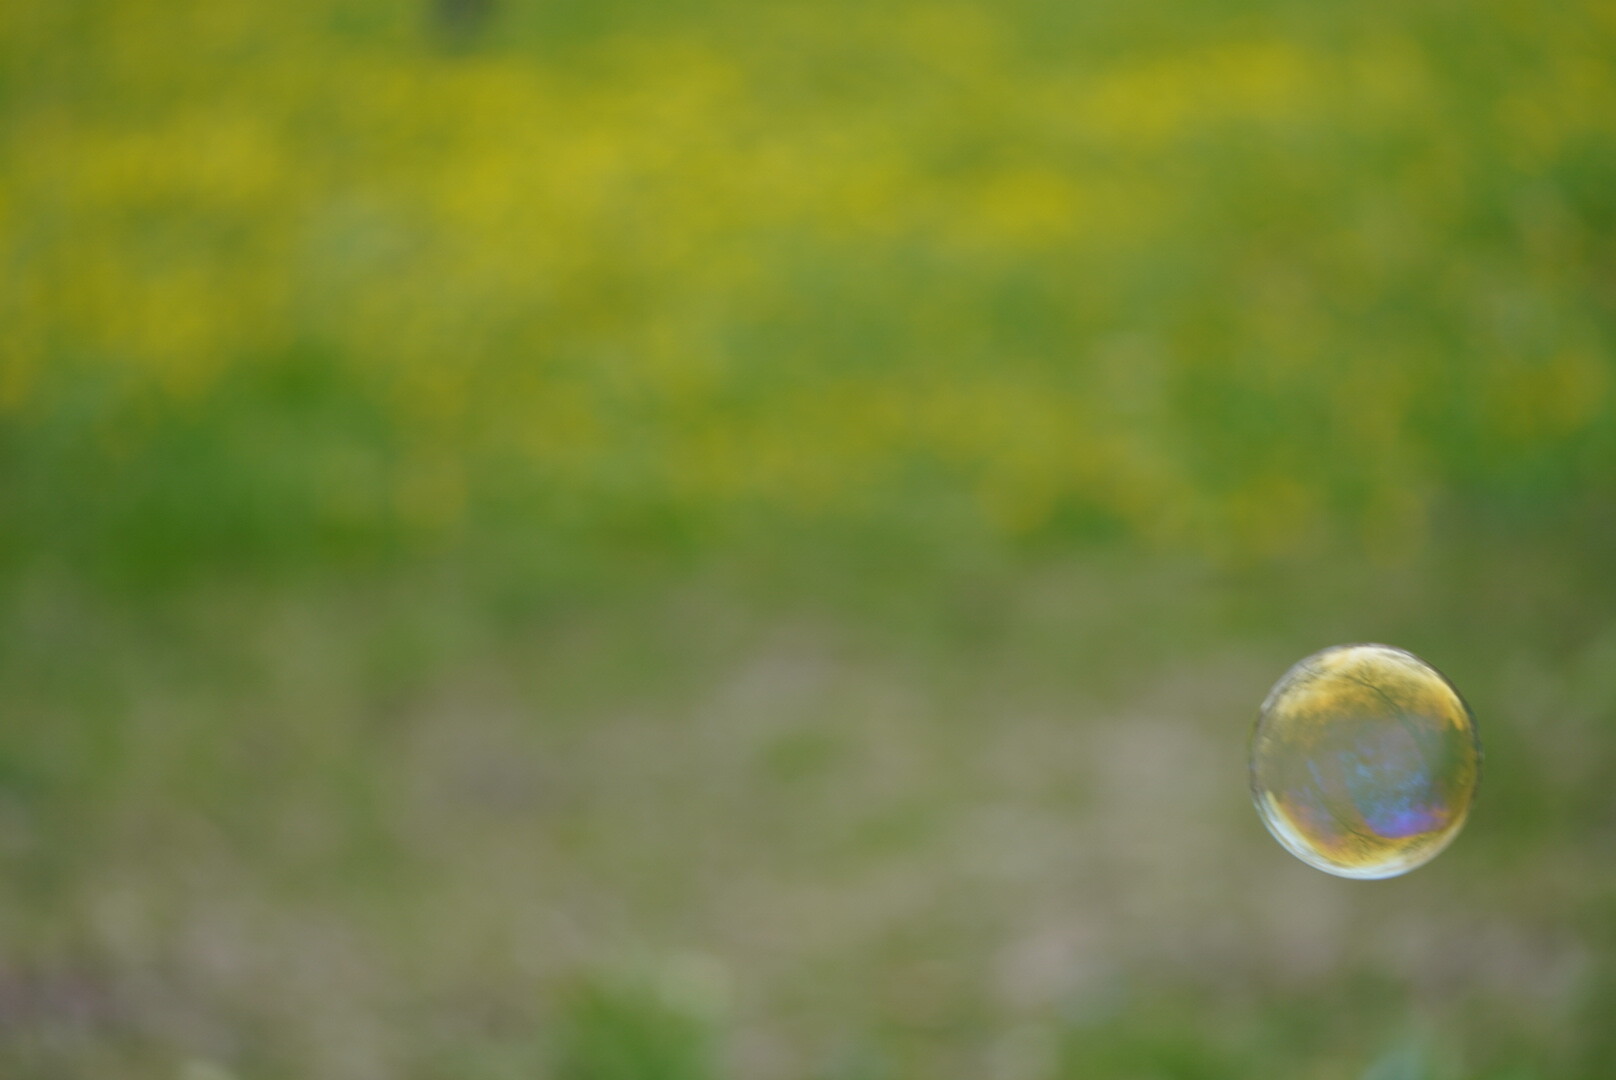 A green out of focus background. In the lower right corner is a soapbubble, sharp.